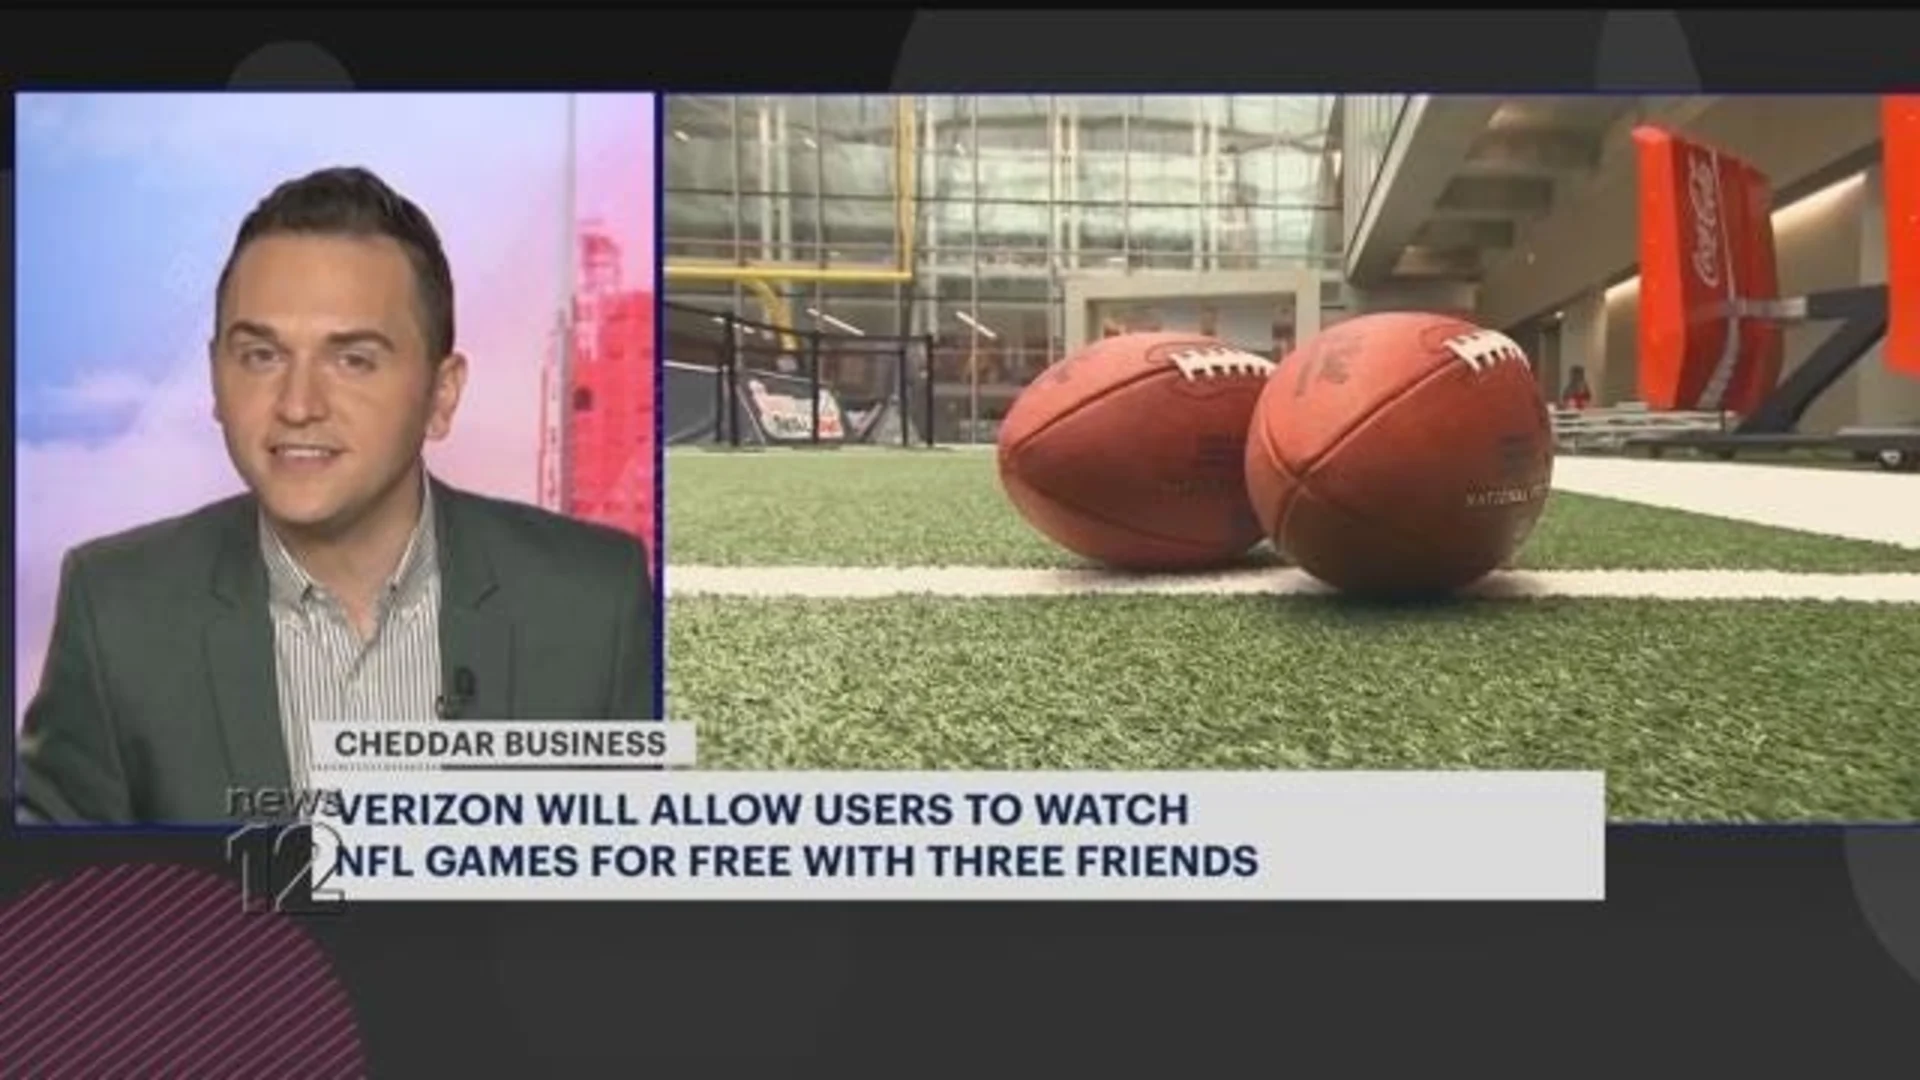 Verizon launches feature to let people livestream NFL games with 3 friends